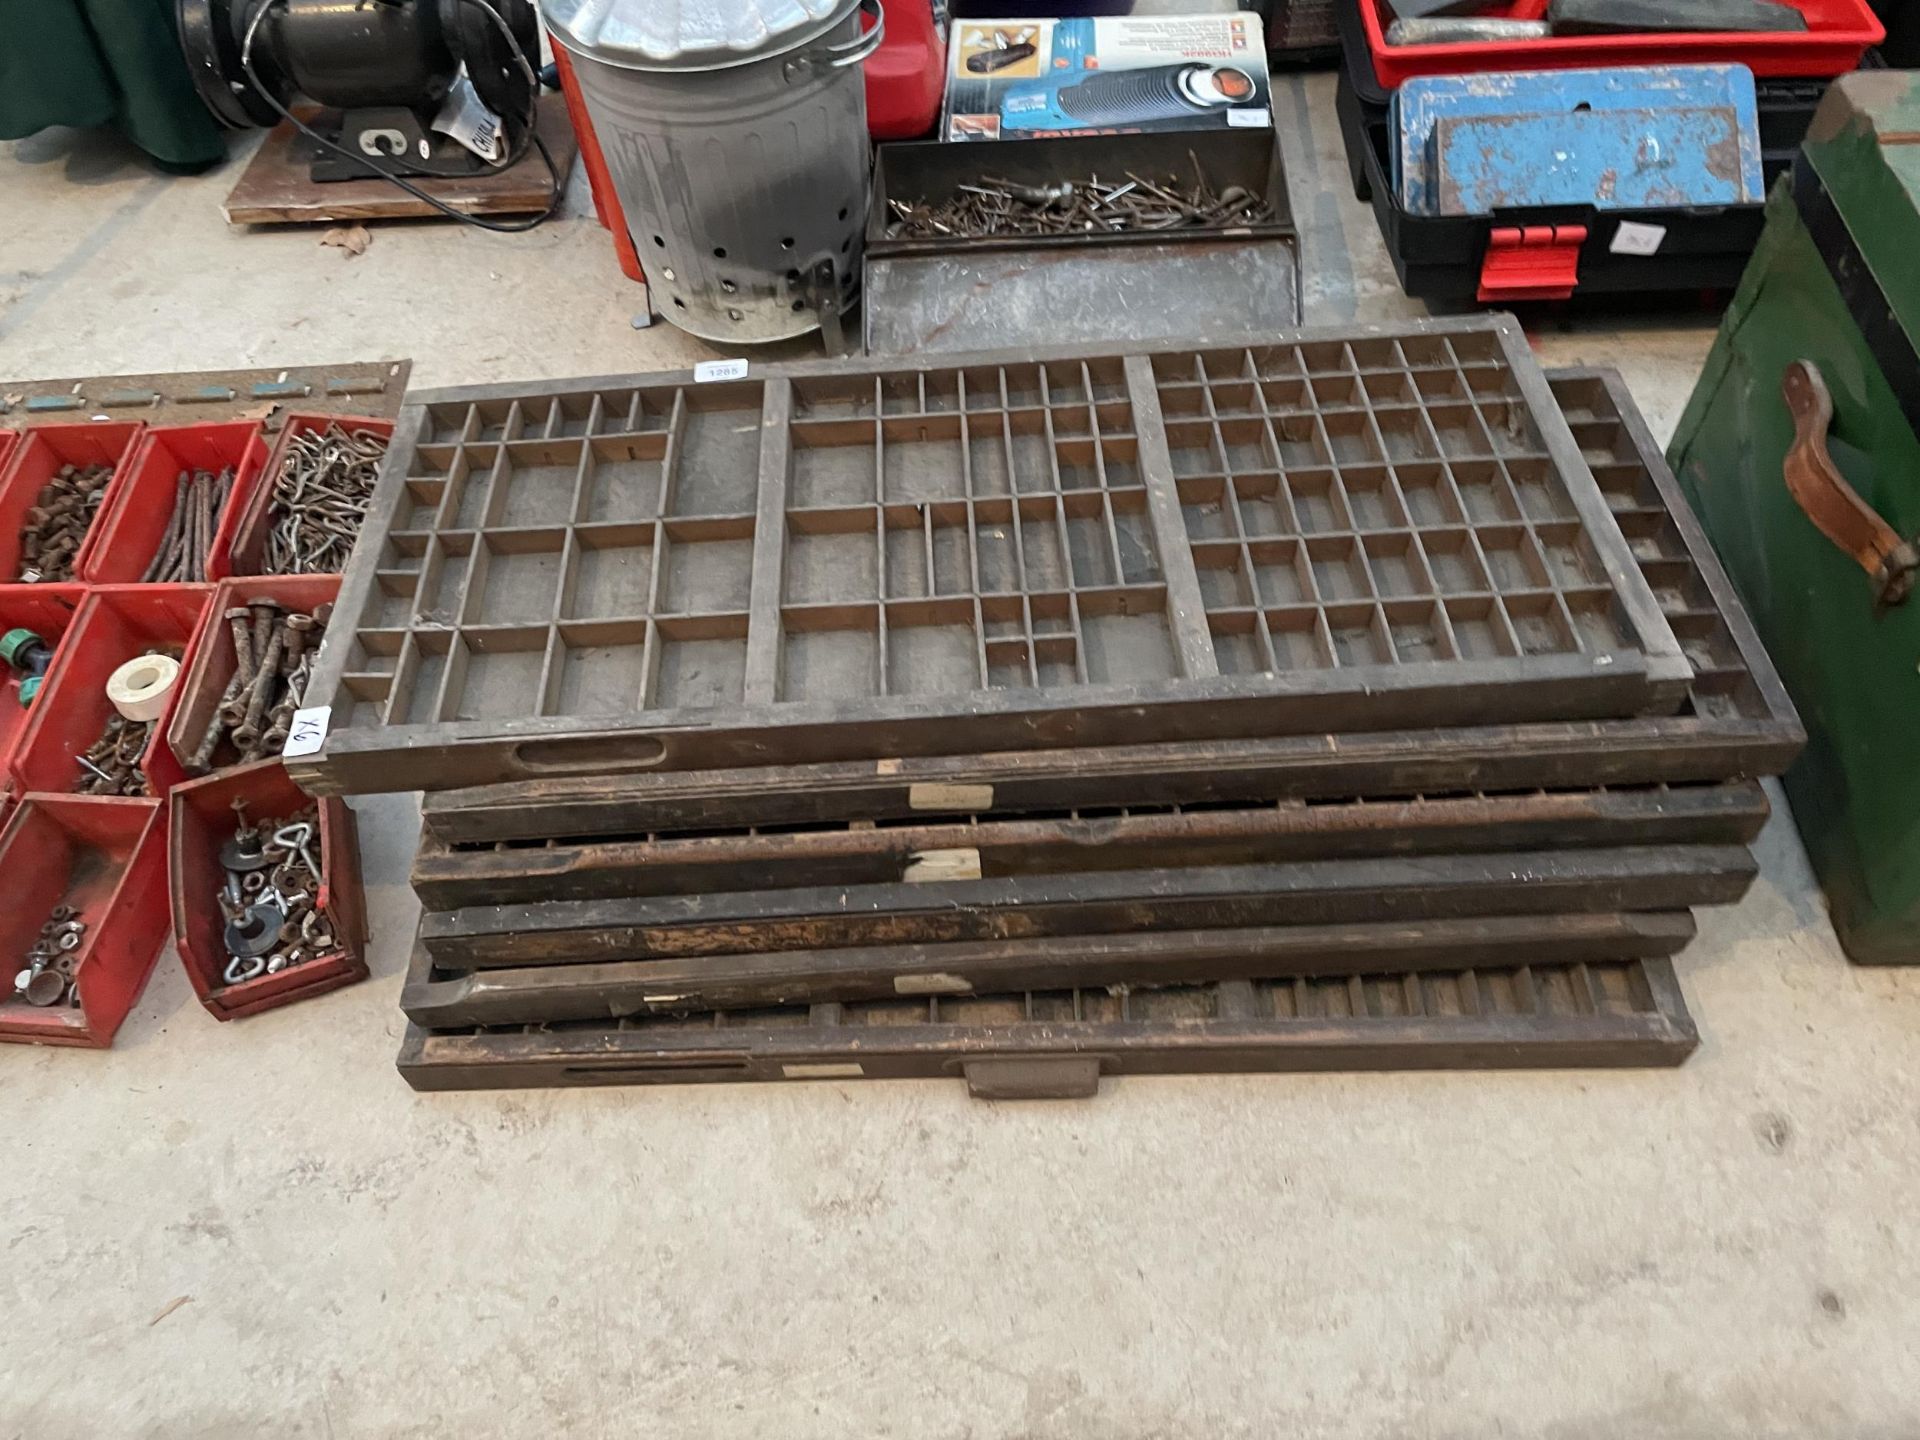 A GROUP OF SIX VINTAGE WOODEN PRINTERS TRAYS